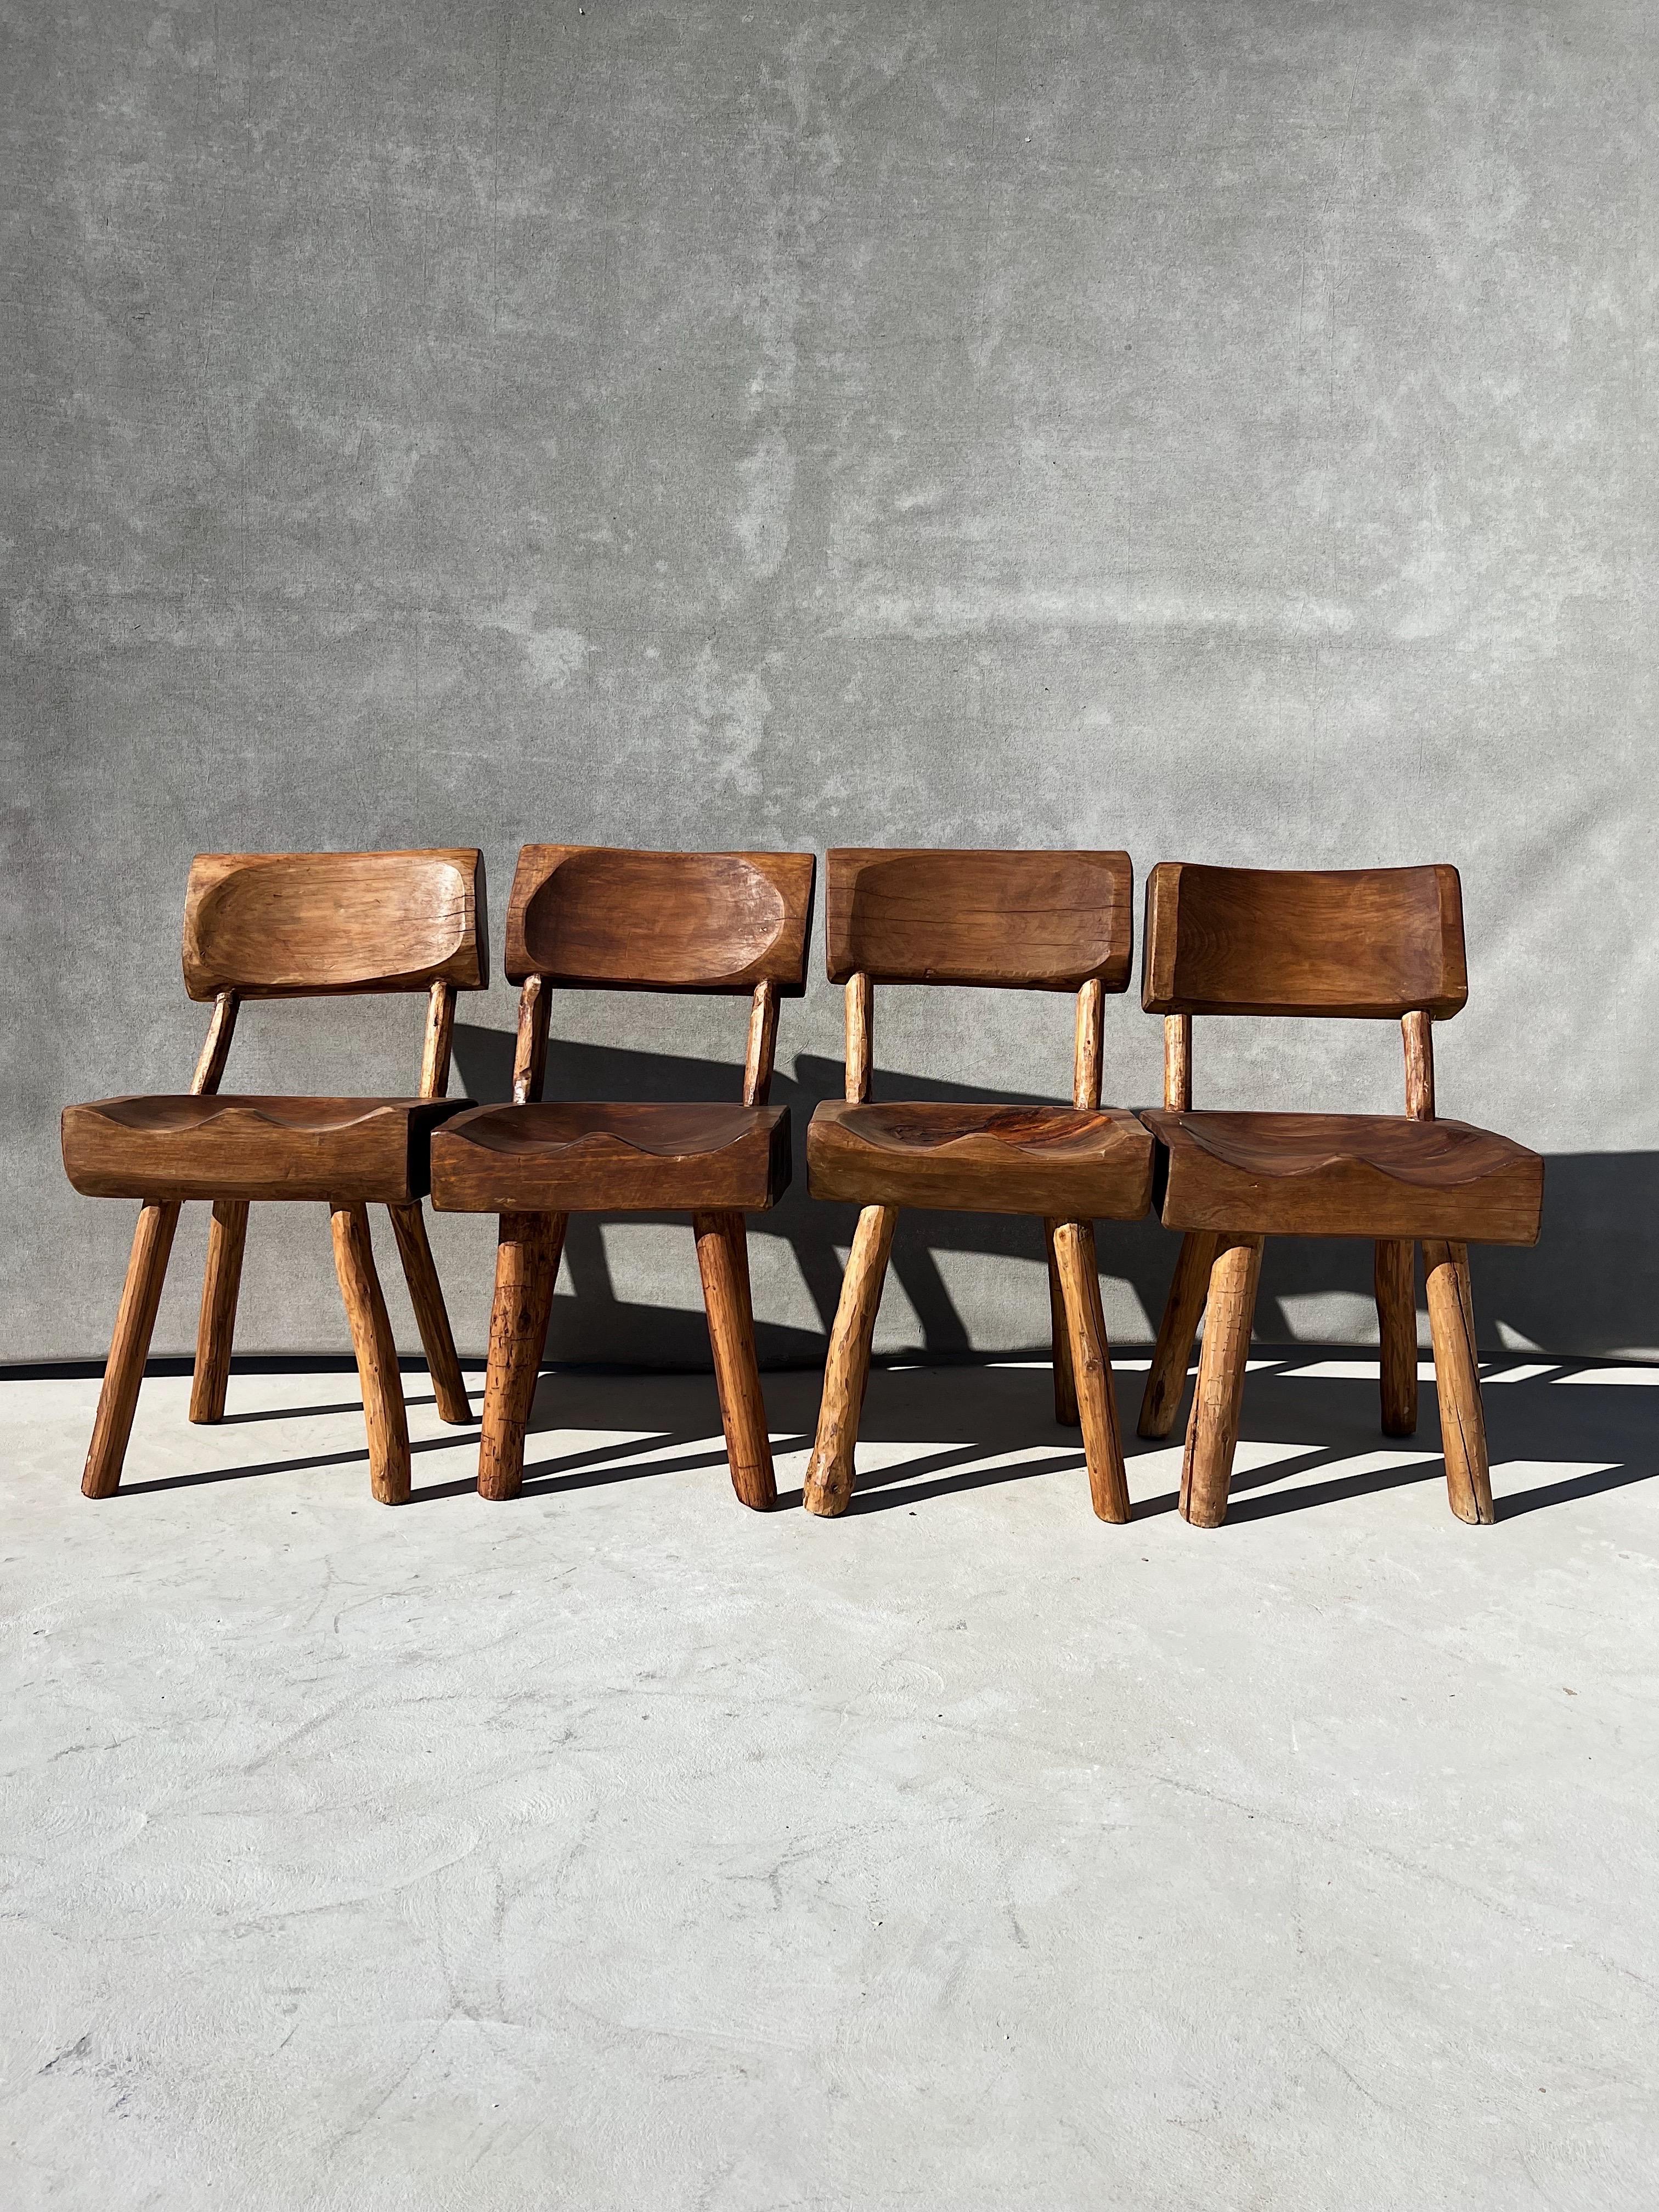 Vintage Wabi-Sabi Artisanal Wood Dining Chairs 

A set of 8 artisanal made dining chairs (16 chairs available), hand-carved from thick slabs of wood 

Showcasing excellent craftsmanship and a unique one of a kind style 

A brutalist primitive